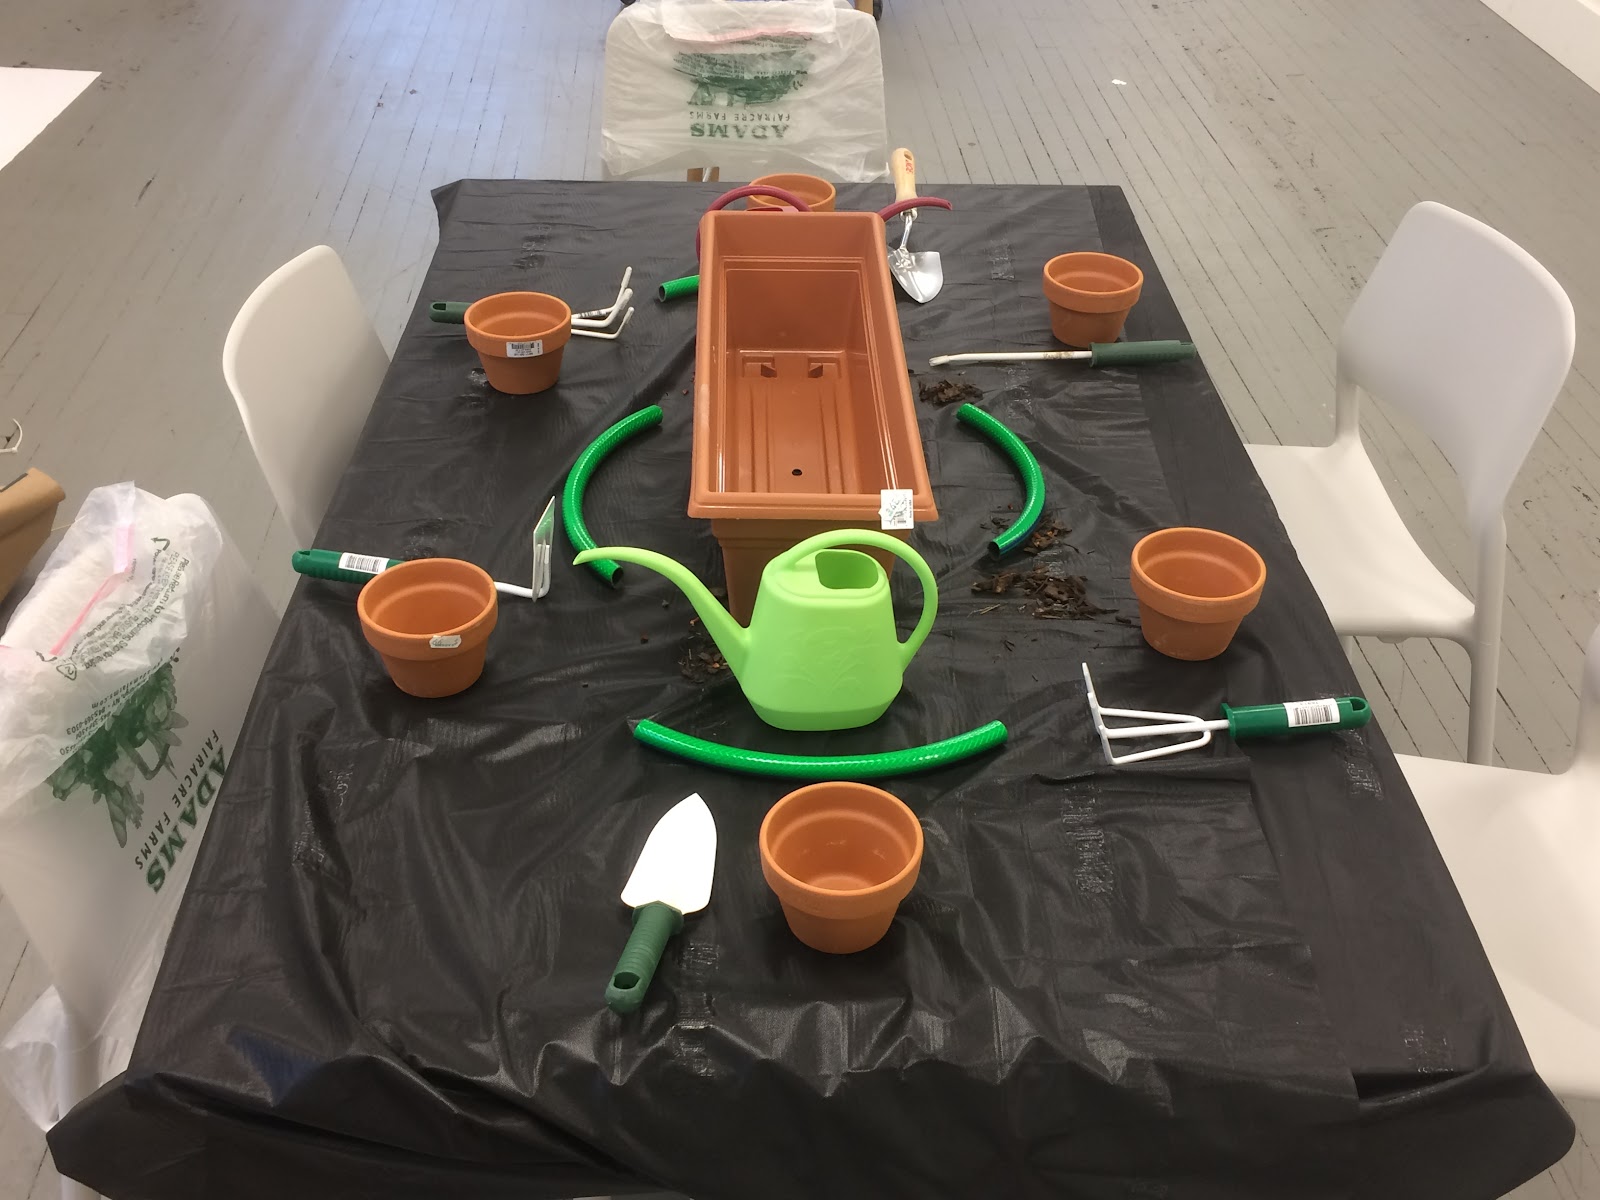 Robert Appleby arranged a table with a meal to be eaten only with gardening tools and flower pots.